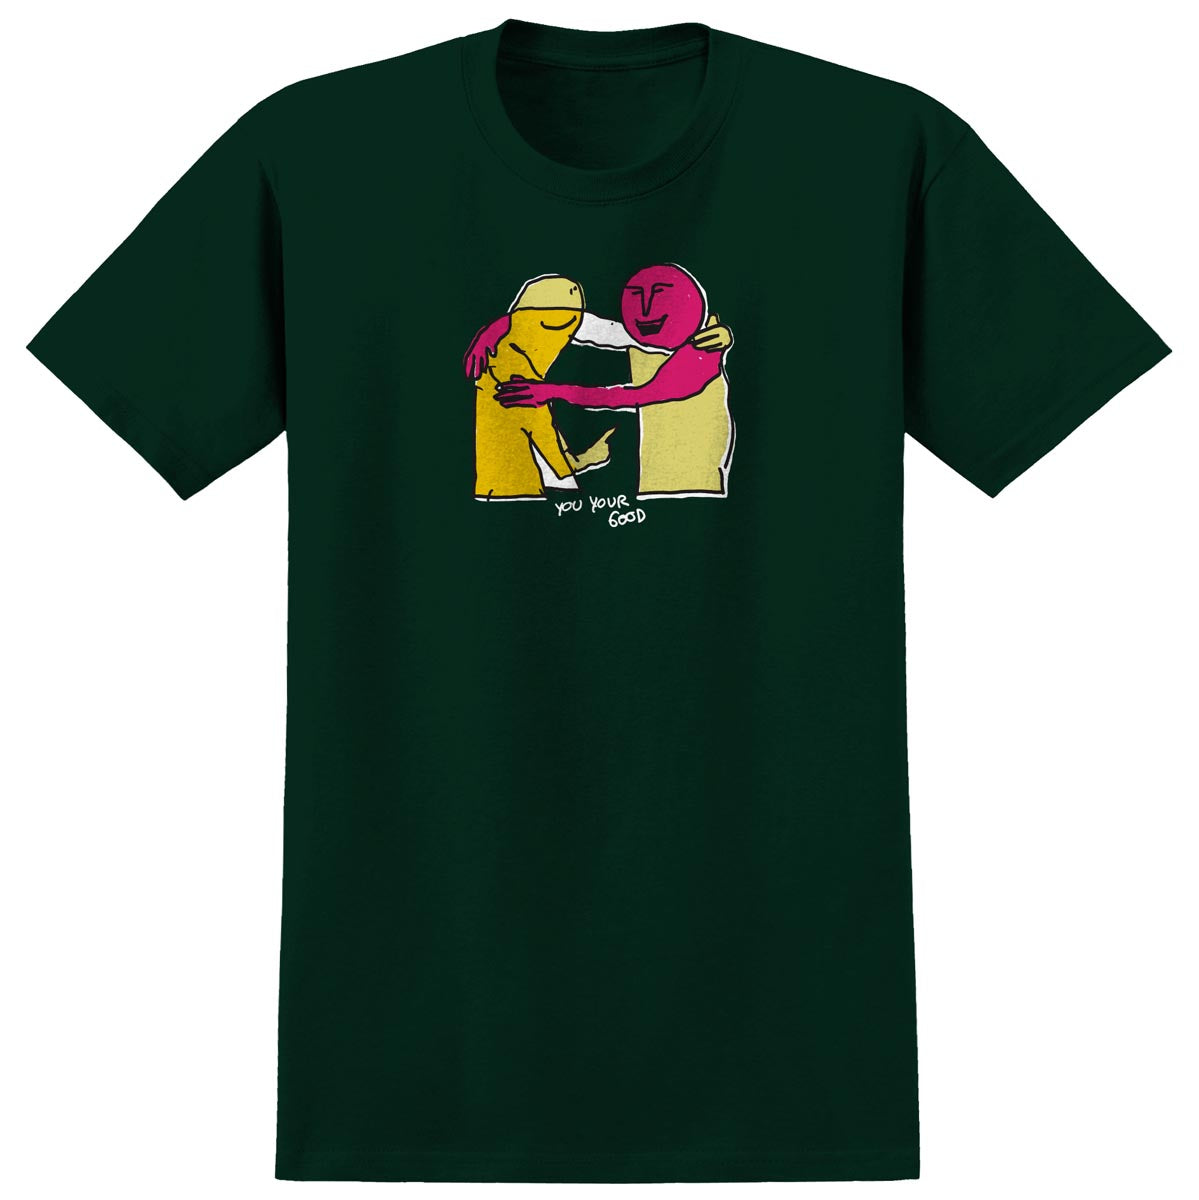 Krooked Your Good T-Shirt - Maroon image 1